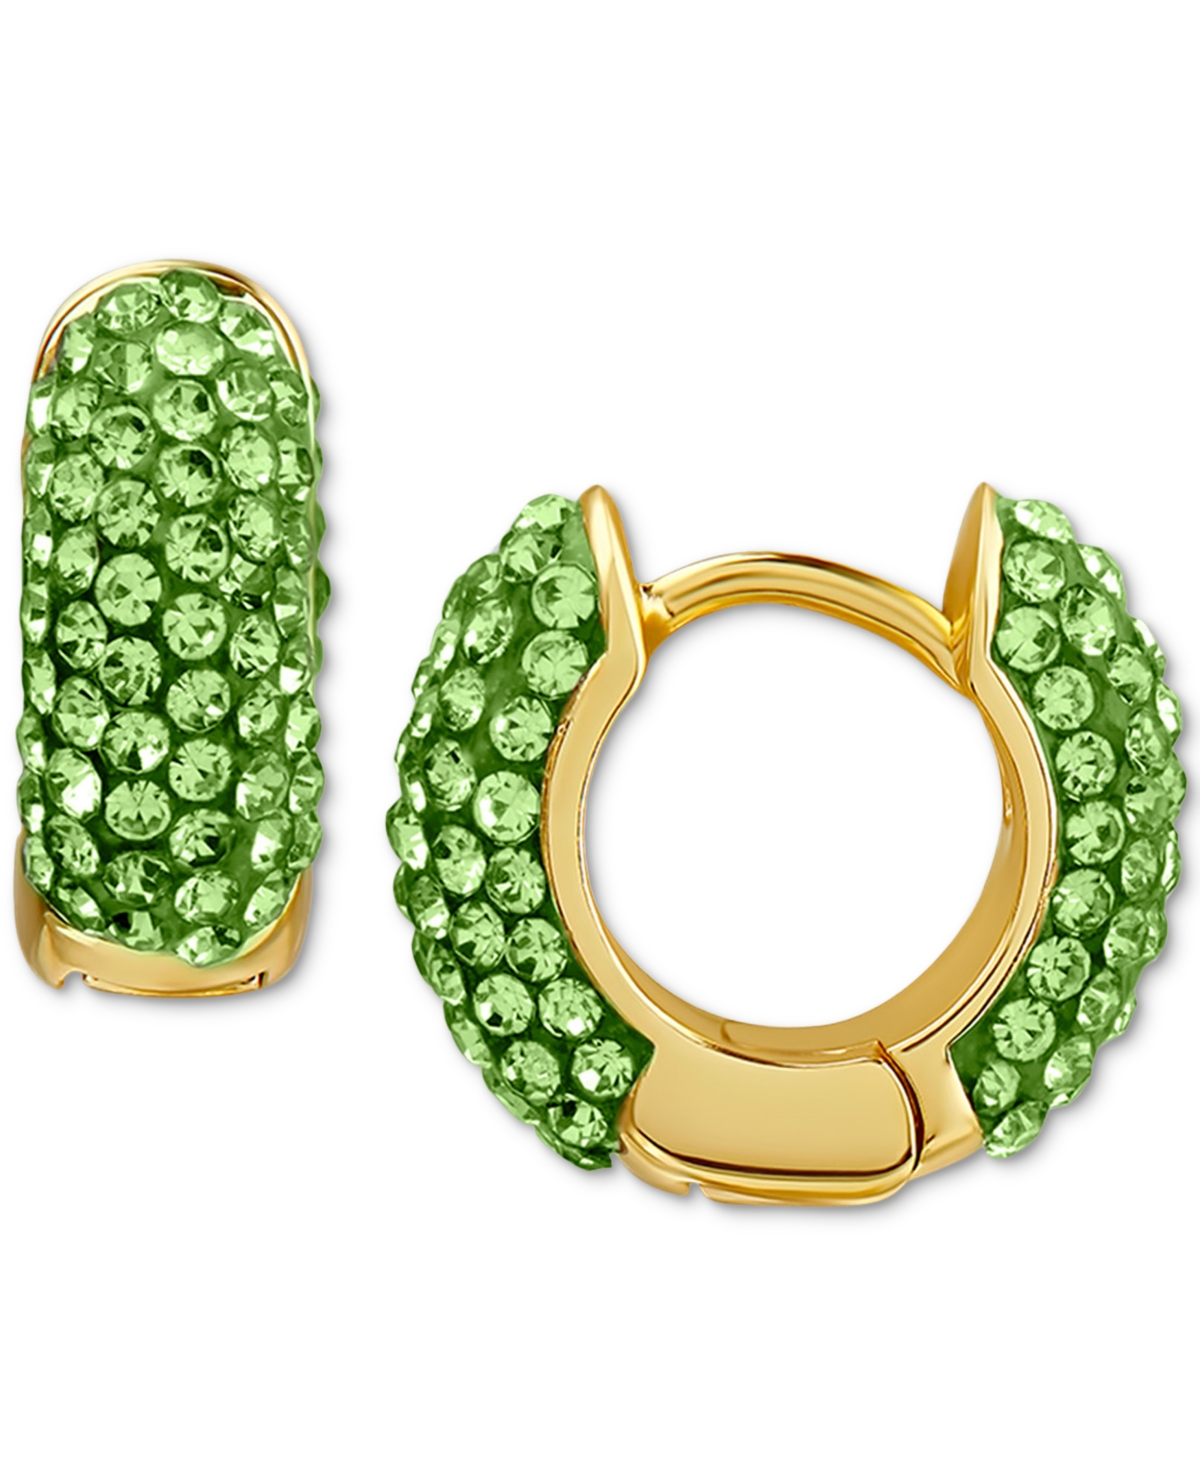 Giani Bernini Crystal Pave Small Huggie Hoop Earrings In 18k Gold-plated Sterling Silver, 13mm, Created For Macy's In Green